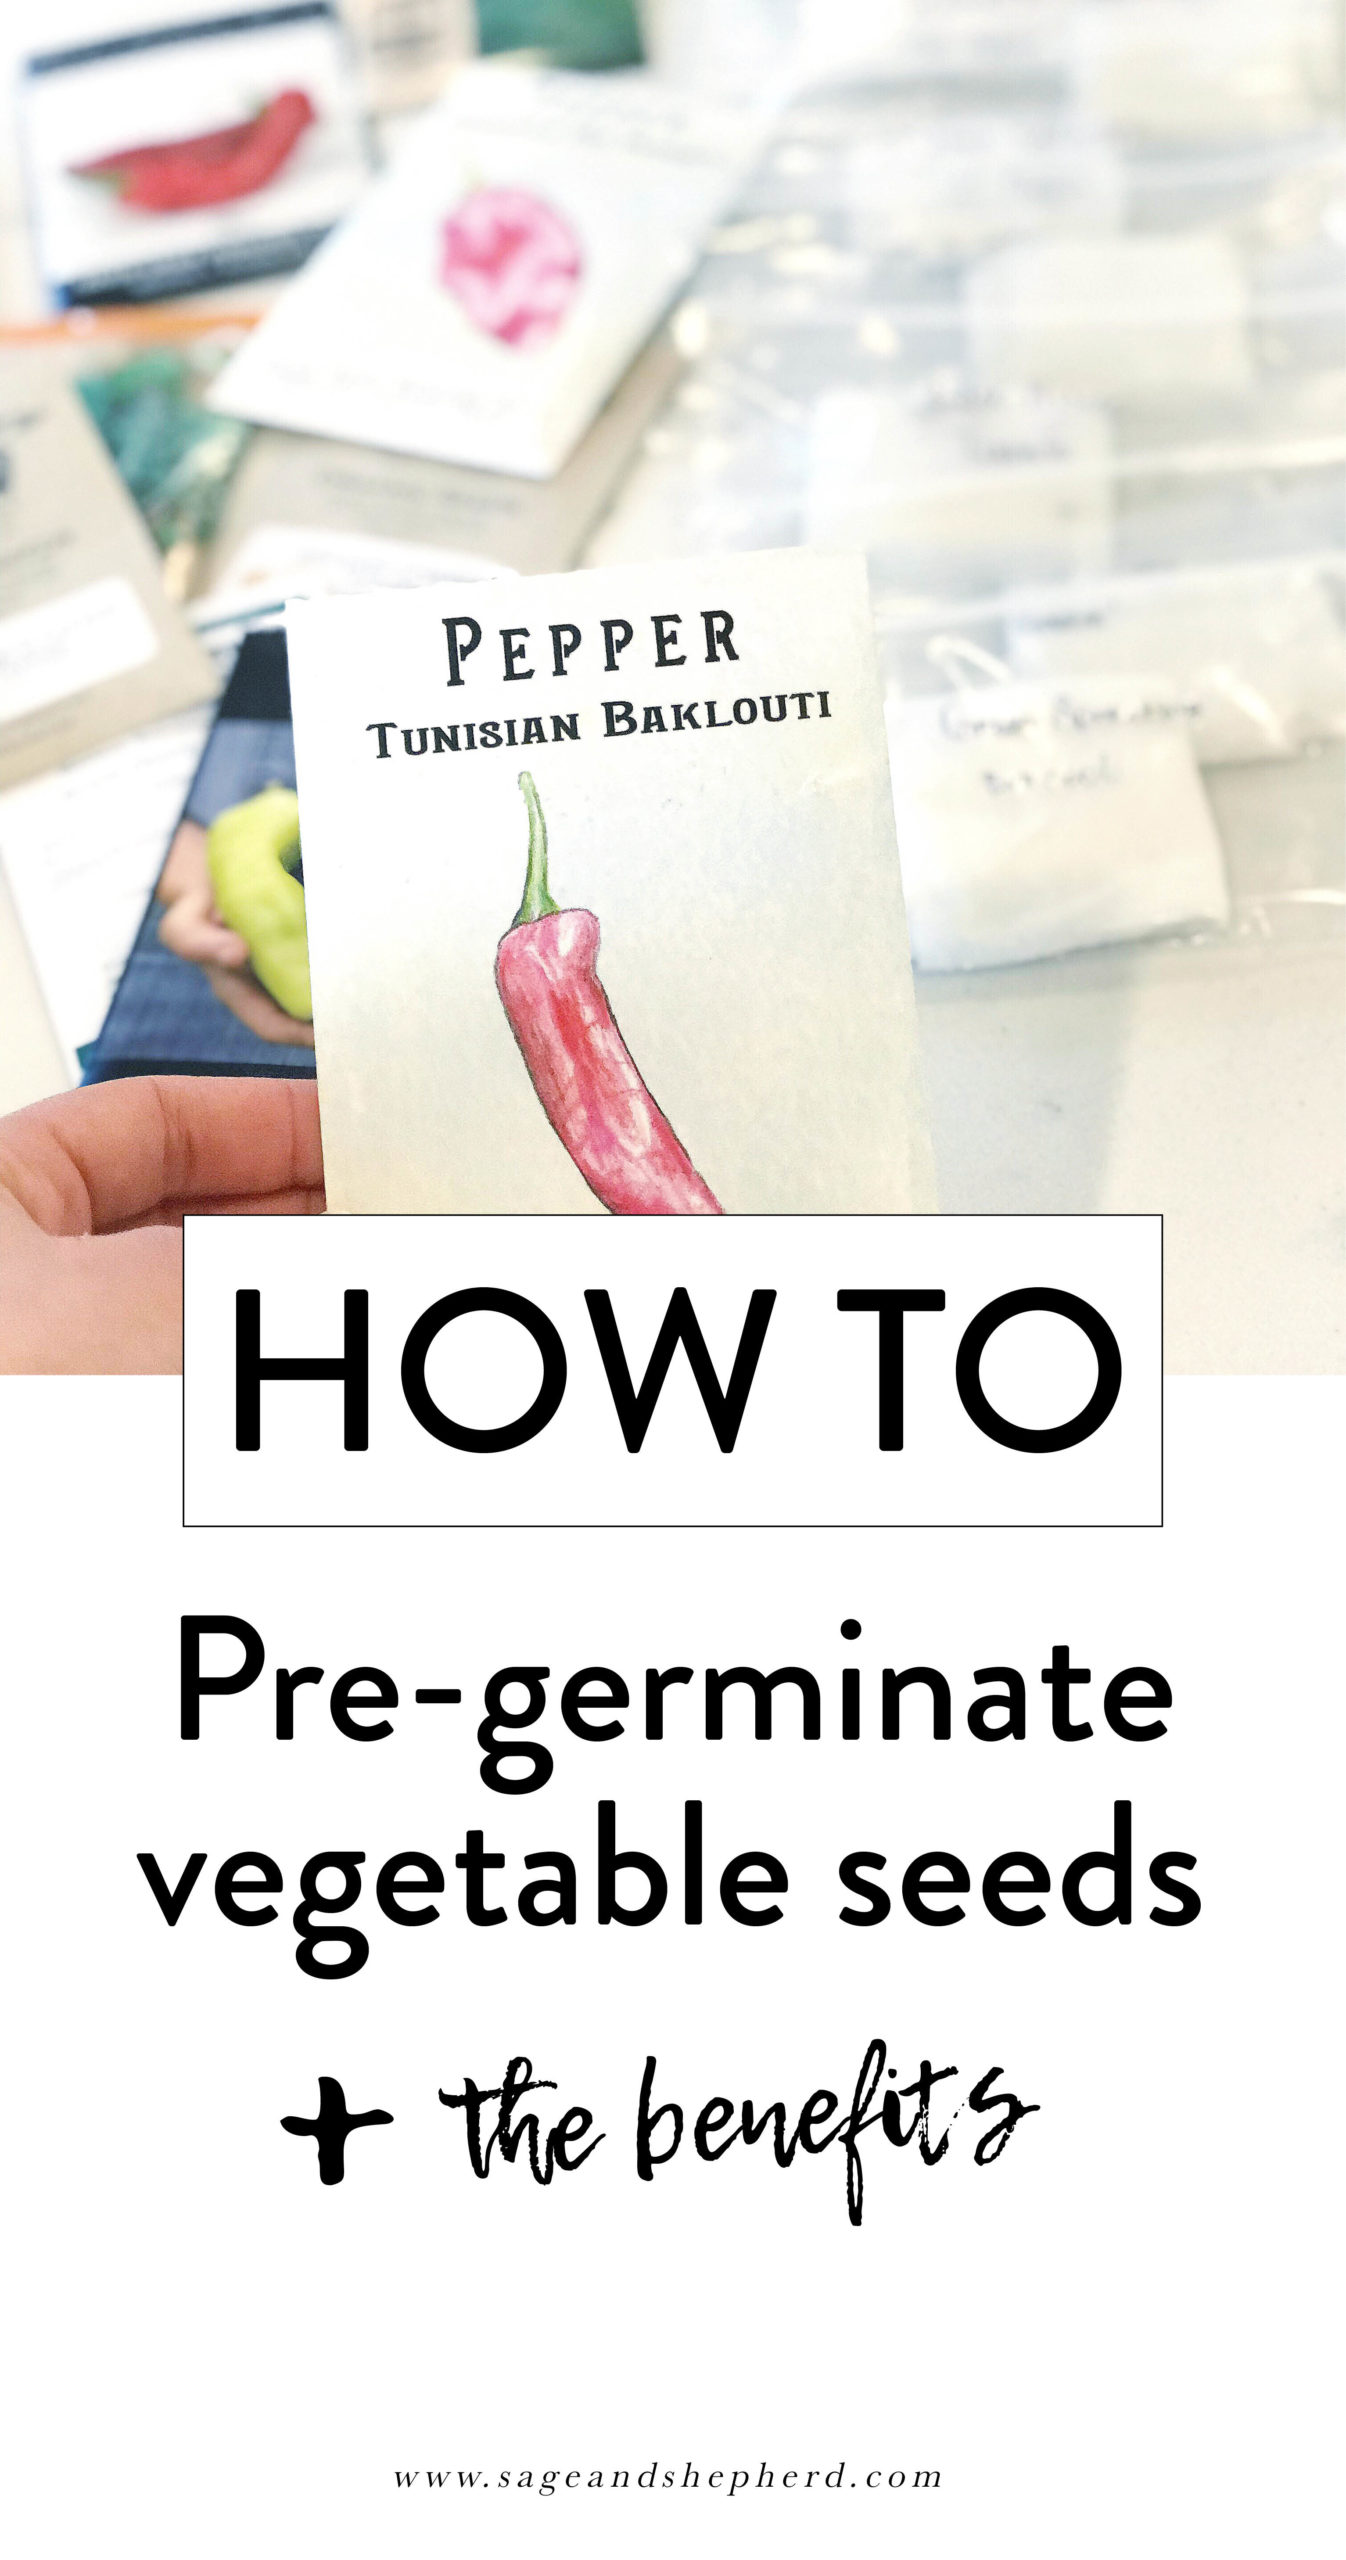 how to pre-germinate seeds